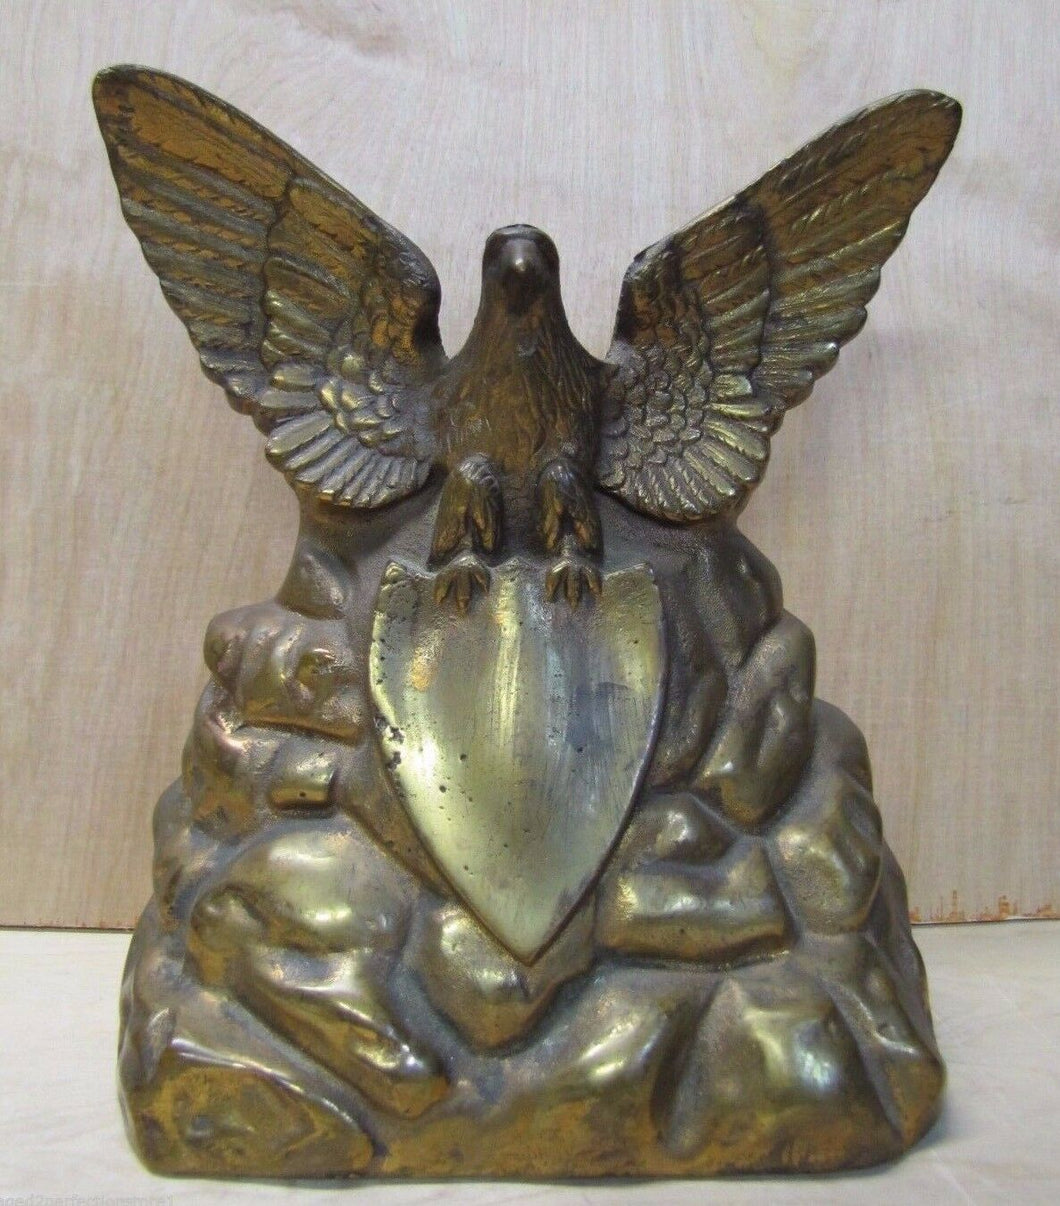 Old Brass Eagle Doorstop large heavy spread winged shield perched on rocks Art